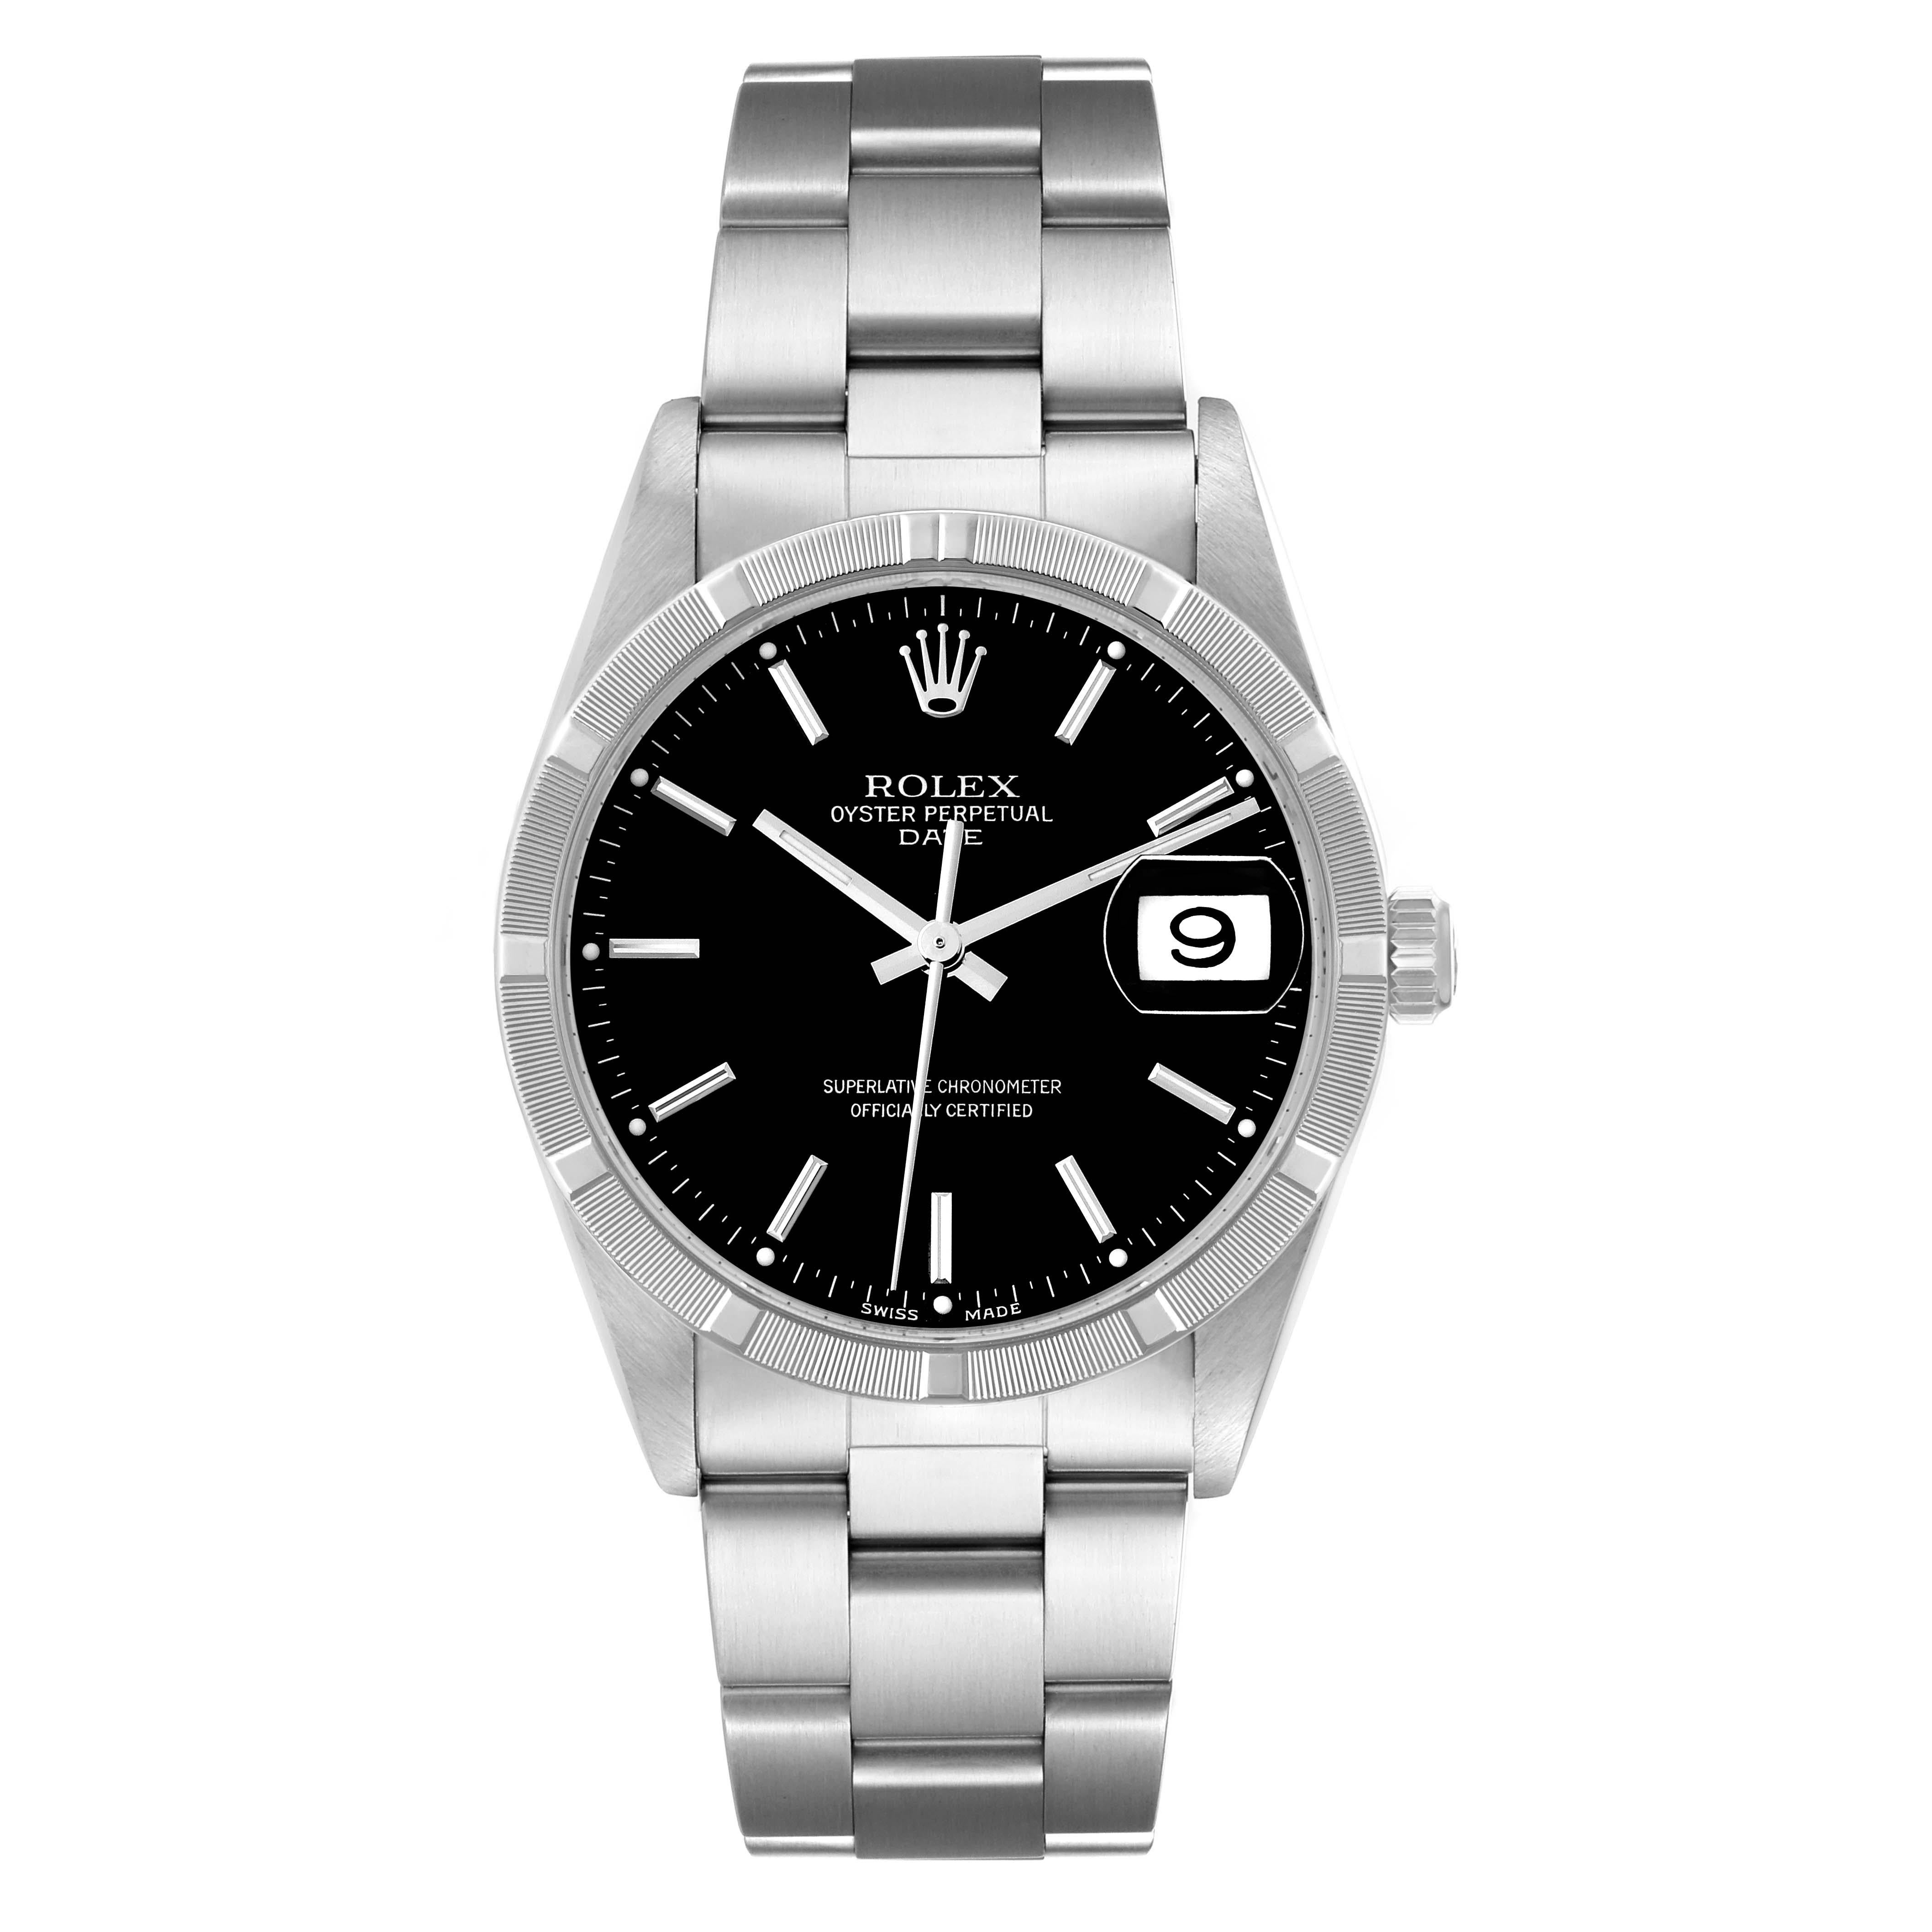 Rolex Date Black Dial Engine Turned Bezel Steel Mens Watch 15210 Box Papers. Officially certified chronometer automatic self-winding movement. Stainless steel oyster case 34 mm in diameter. Rolex logo on the crown. Stainless steel engine turned